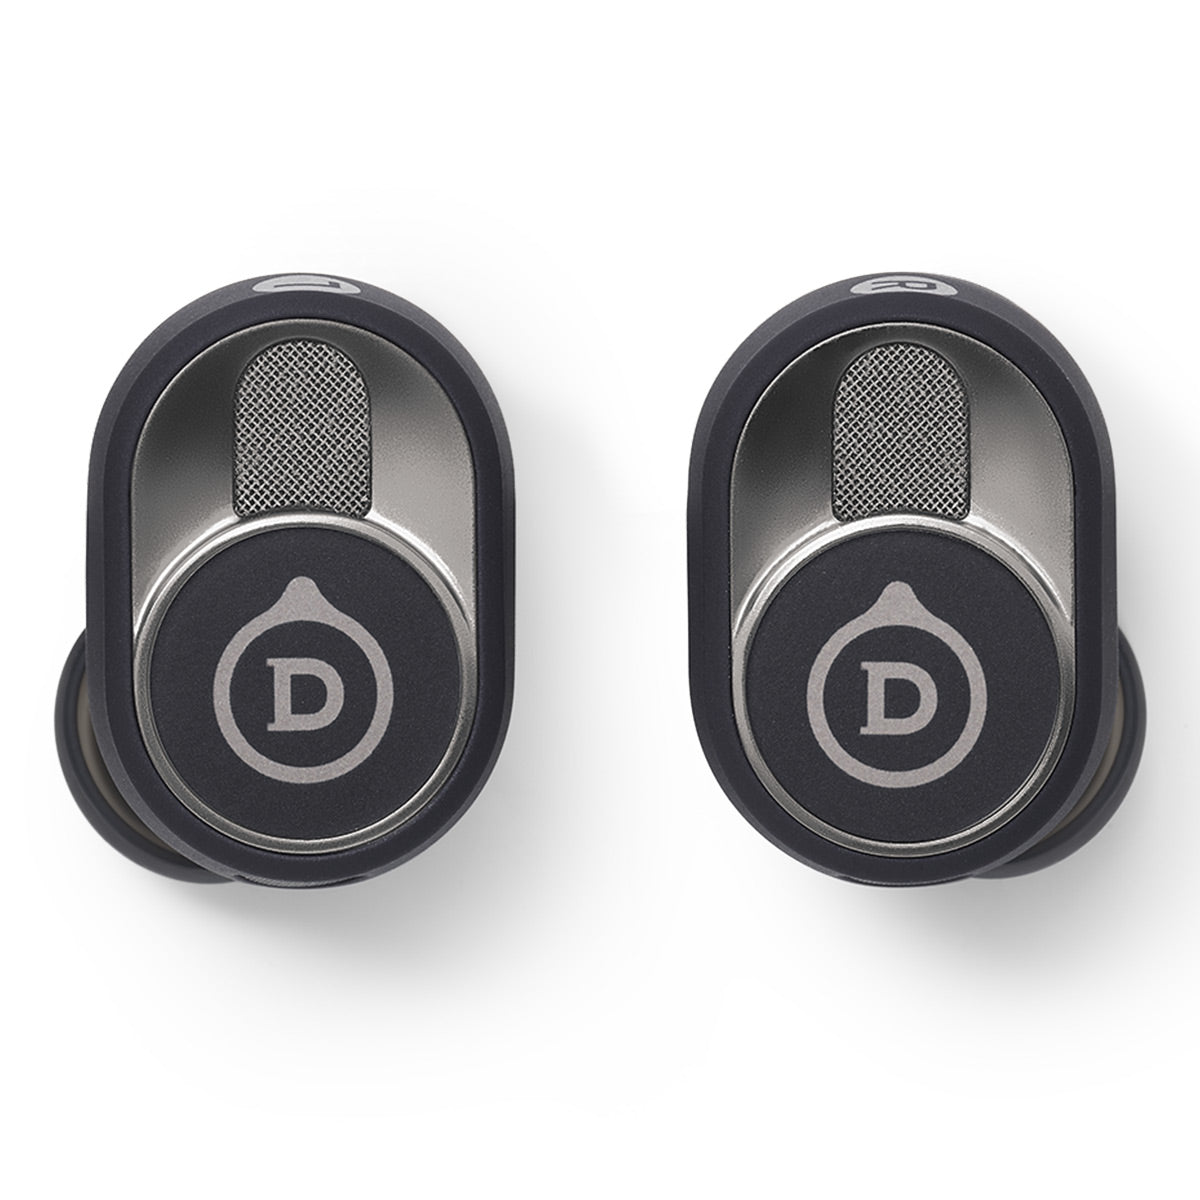 Devialet Gemini II True Wireless Bluetooth Earbuds with Adaptive Noise Cancellation and IPX4 Water Resistance (Matte Black)